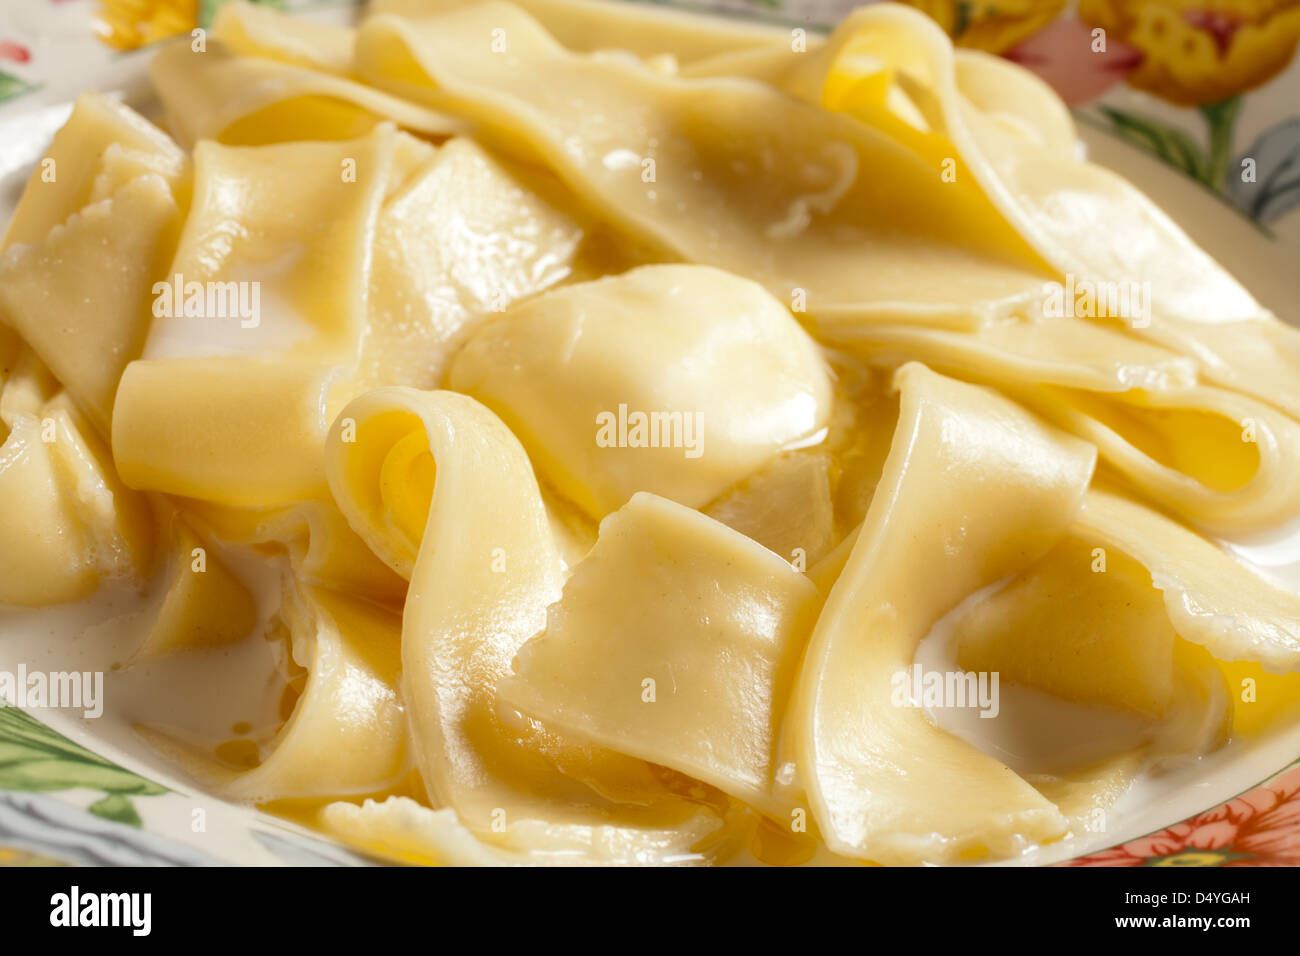 Melksynsels: South African sweet noodles cooked in milk Stock Photo